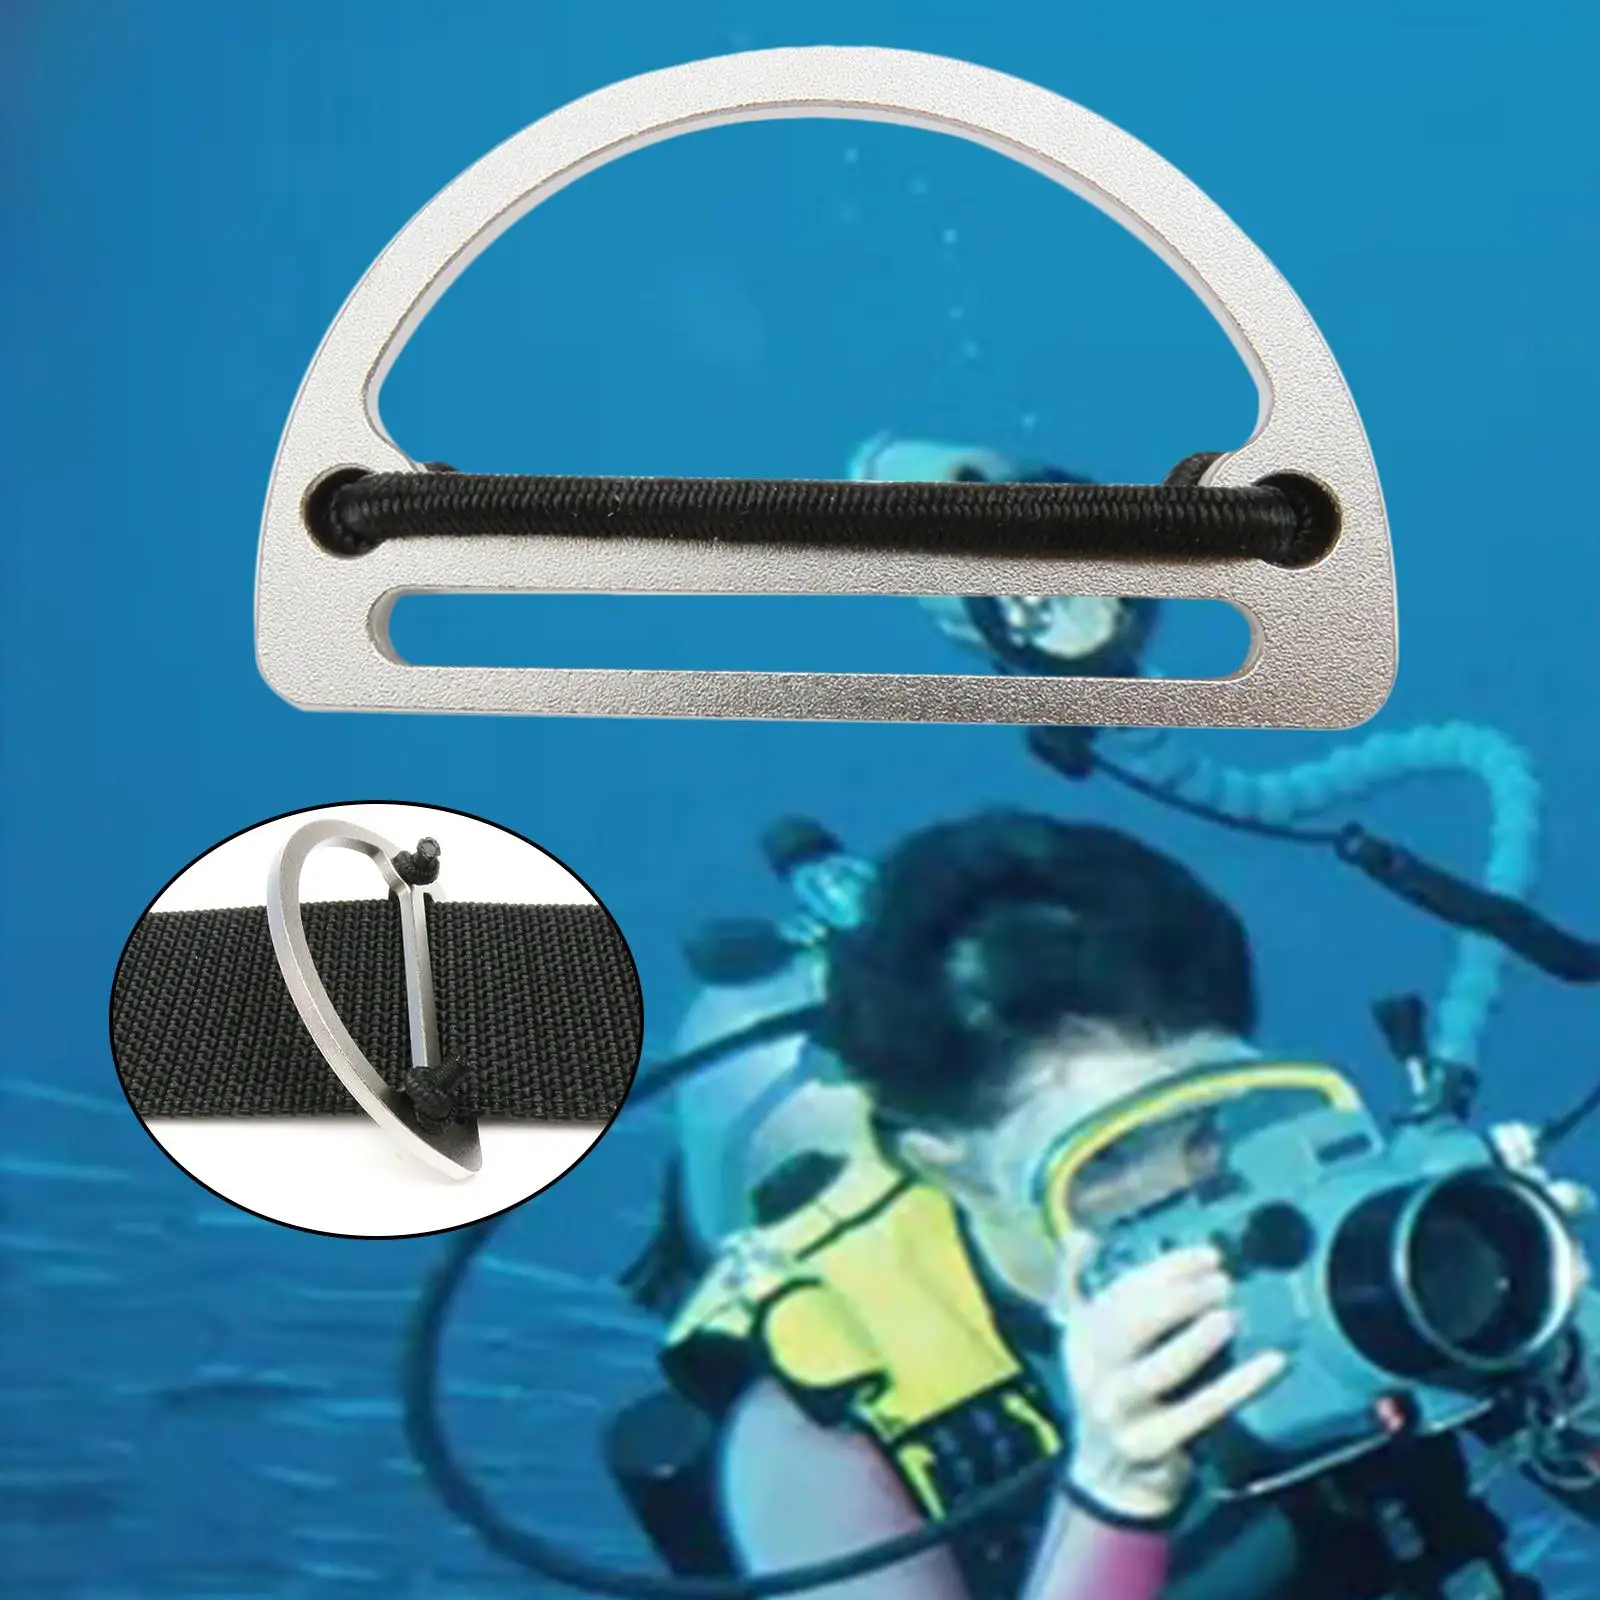 Weight  Bent D , Retainer, Stopper, BCD Accessories, for Webbing 50mm Weight Belt Swimming Surfing Scuba Diving